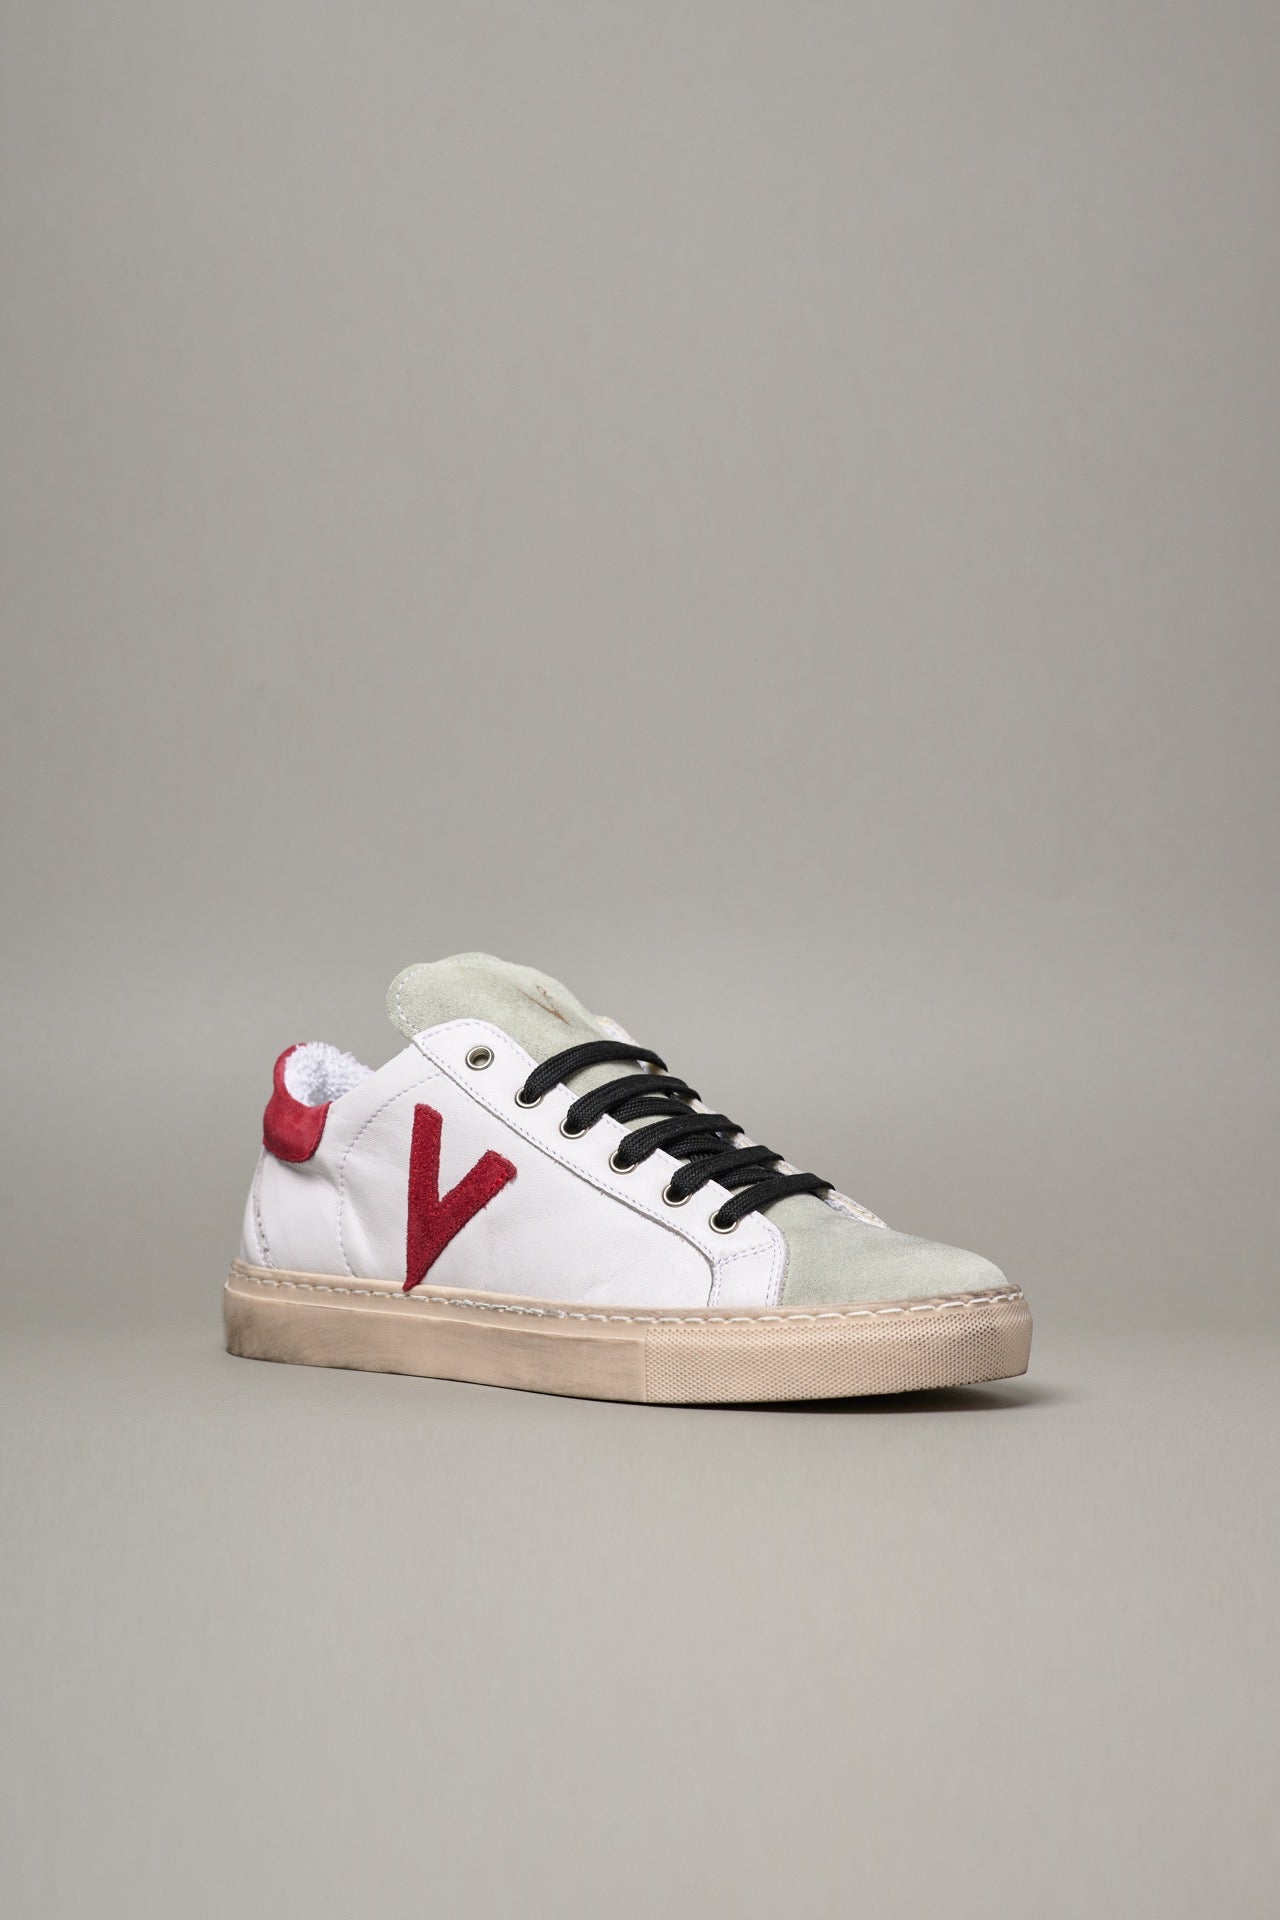 OLYMPIC - White low sole sneakers with Red suede back and insert and Black laces